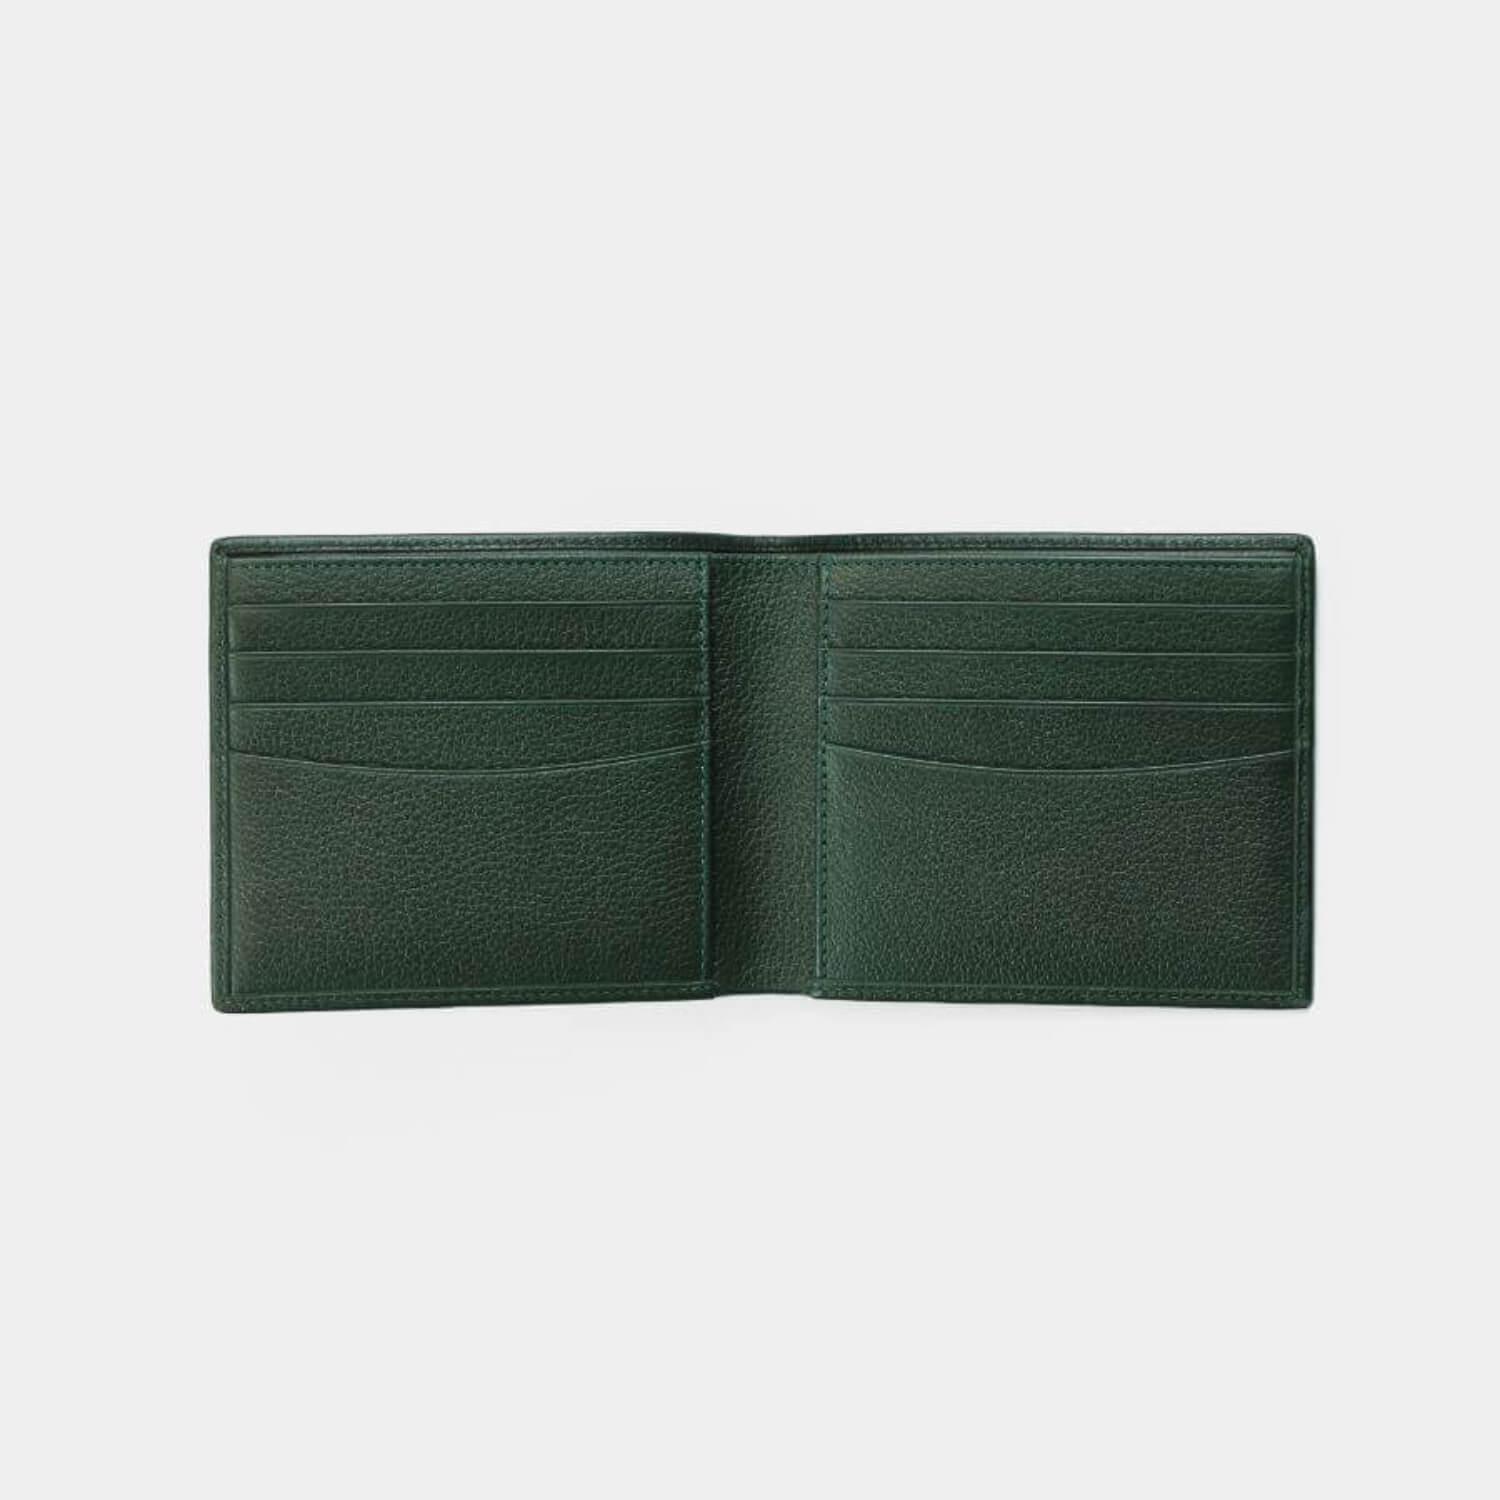 Fine grain leather wallet with 8 card slots and 2 note sections, branded with your company logo